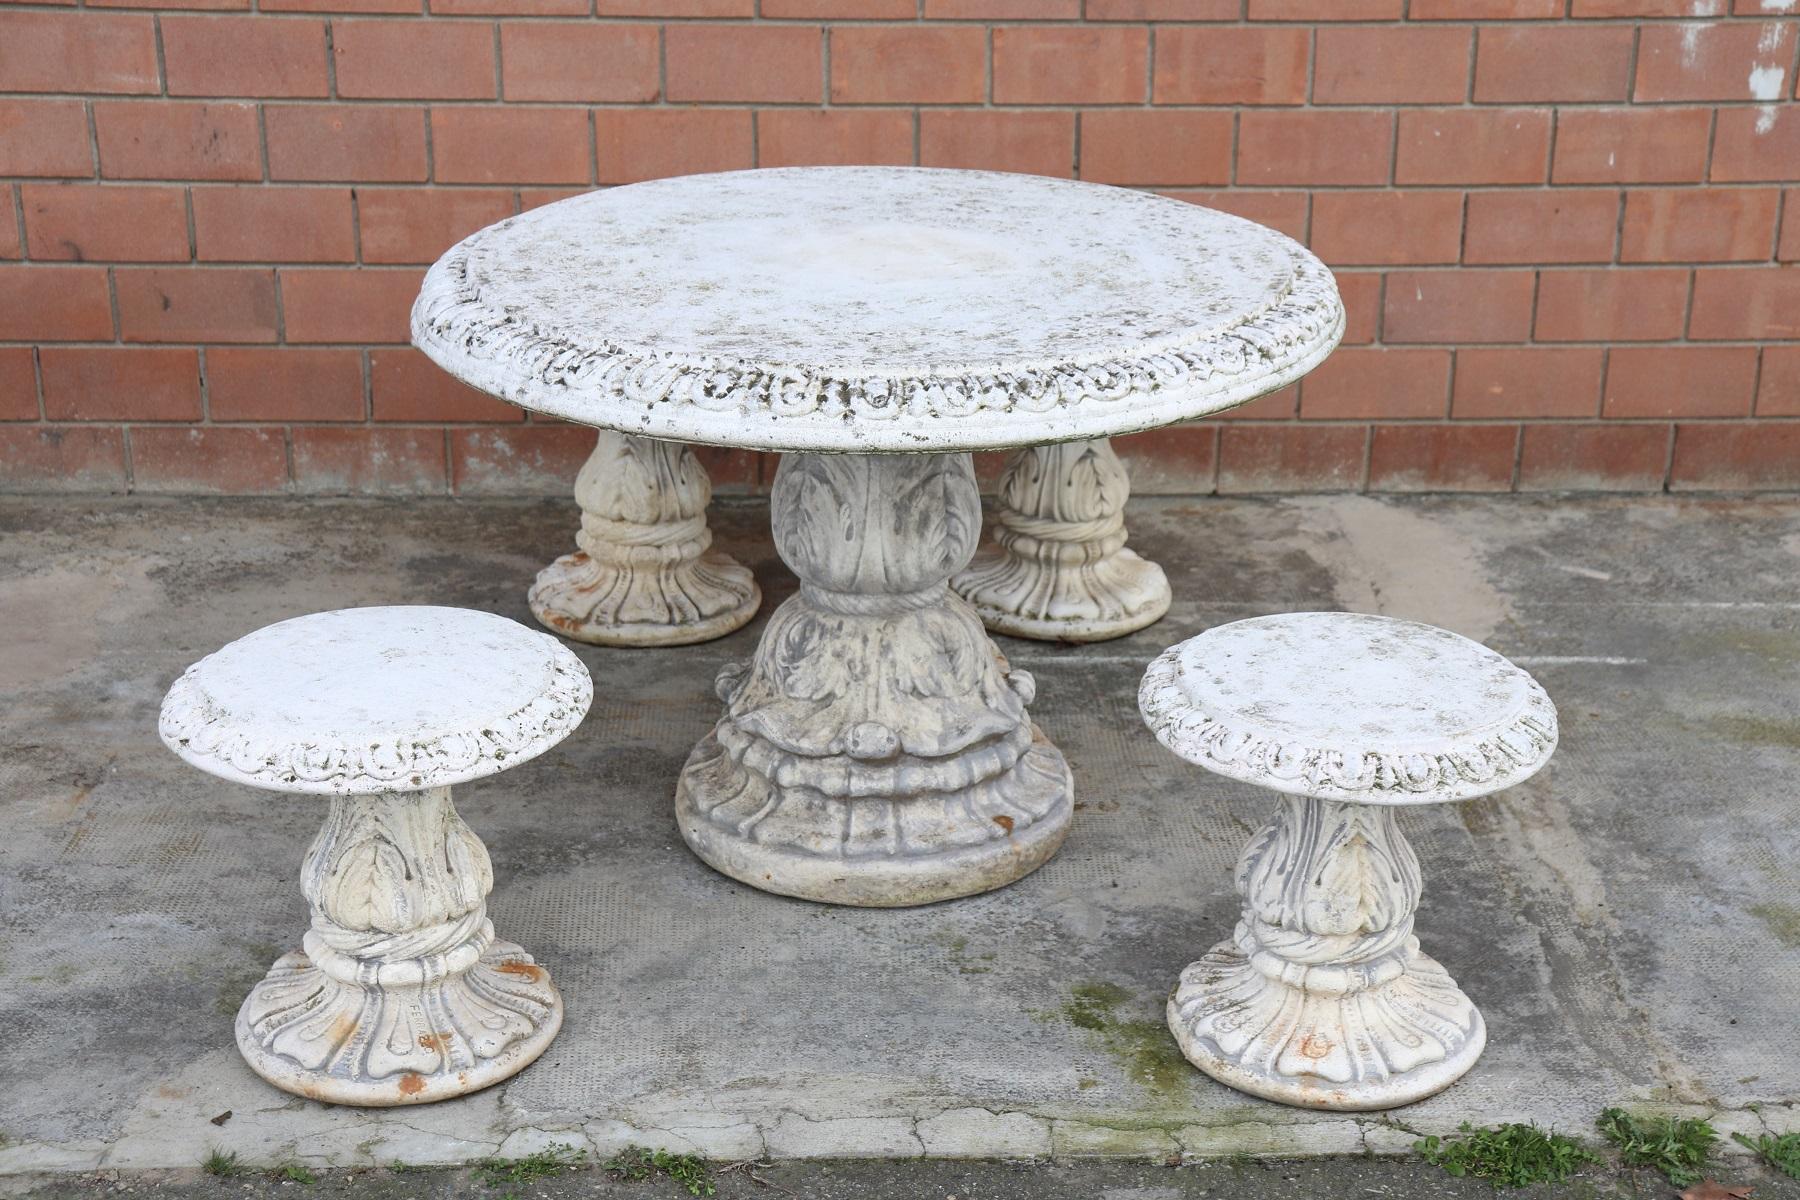 Beautiful refined garden set in neoclassical style, circa 1930s main material stone mixed with gravel and cement. Beautiful round table with bench and two stools. Gorgeous carved decoration. The stone shows signs of the passage of time. This garden